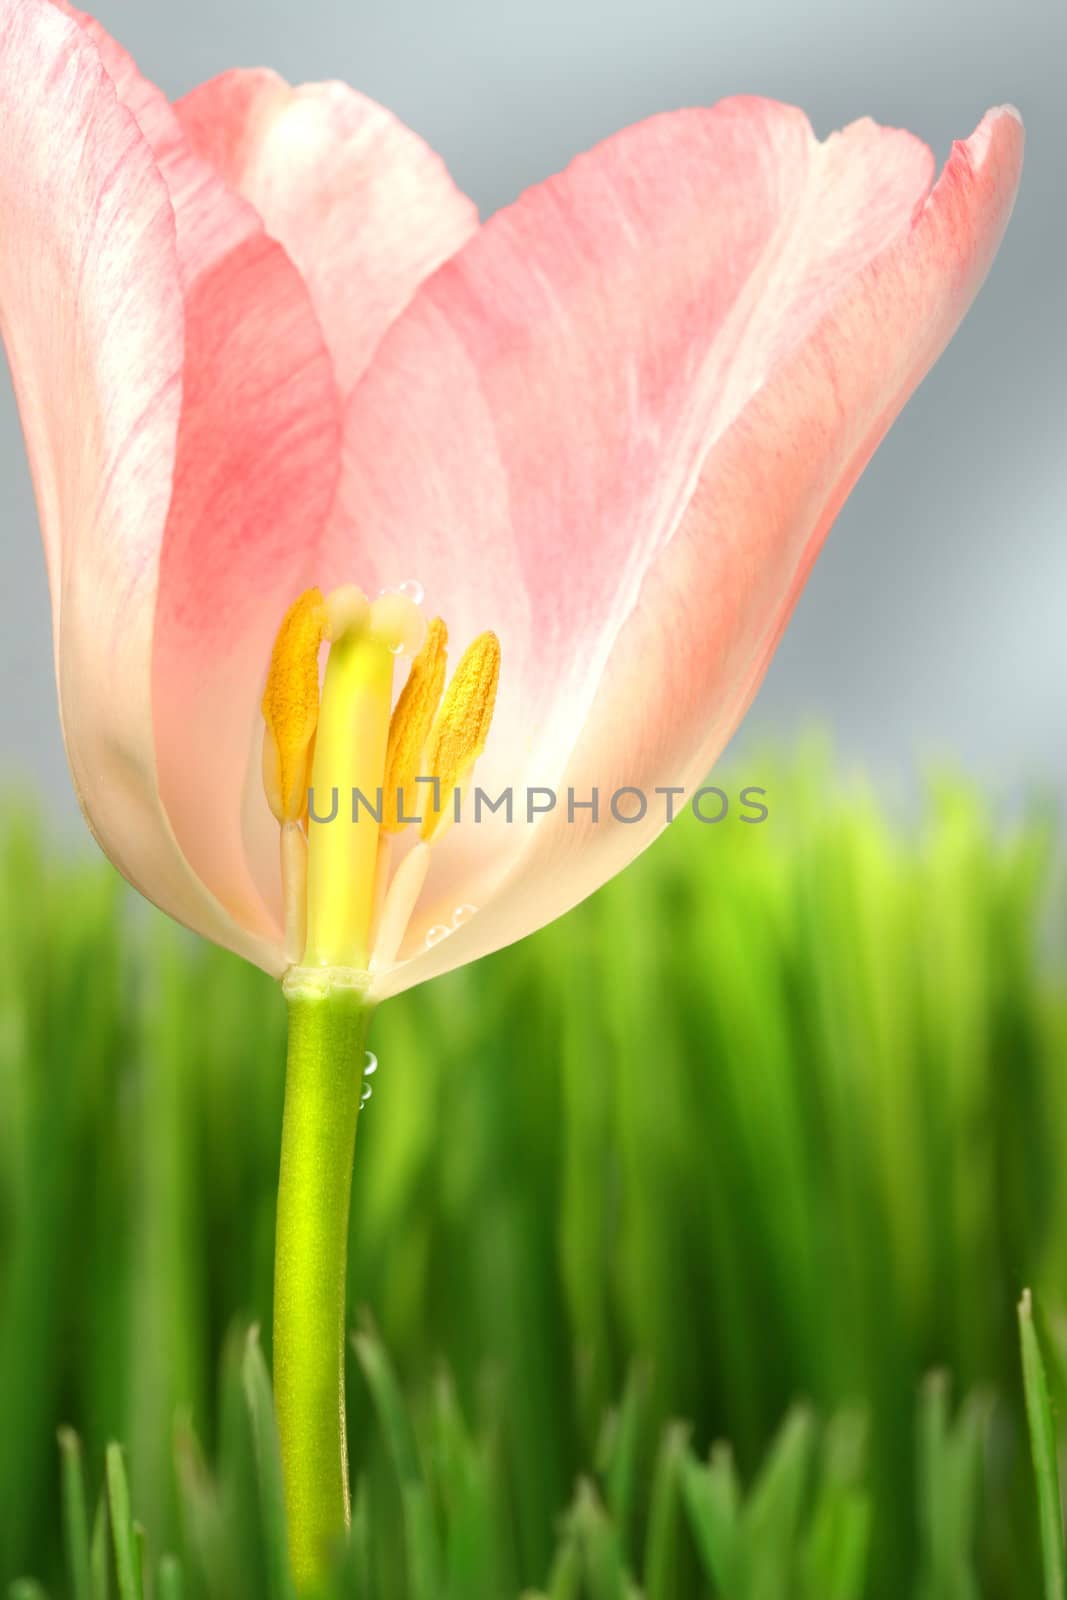 Inside of a pink tulip in the grass